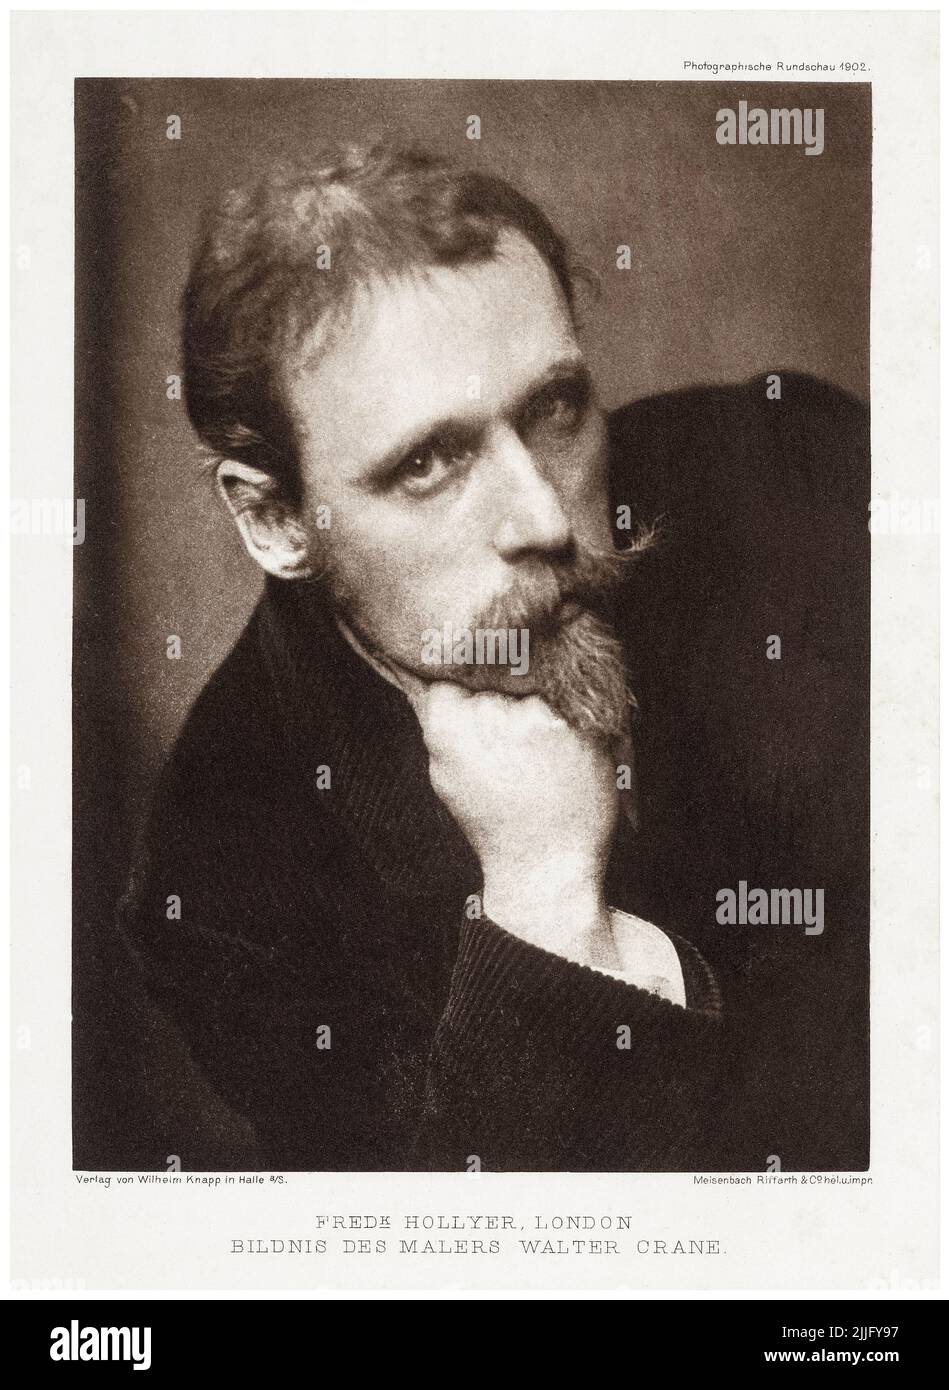 Walter Crane (1855-1915), English artist and book illustrator, portrait photograph in platinum print by Frederick Hollyer, 1897-1902 Stock Photo